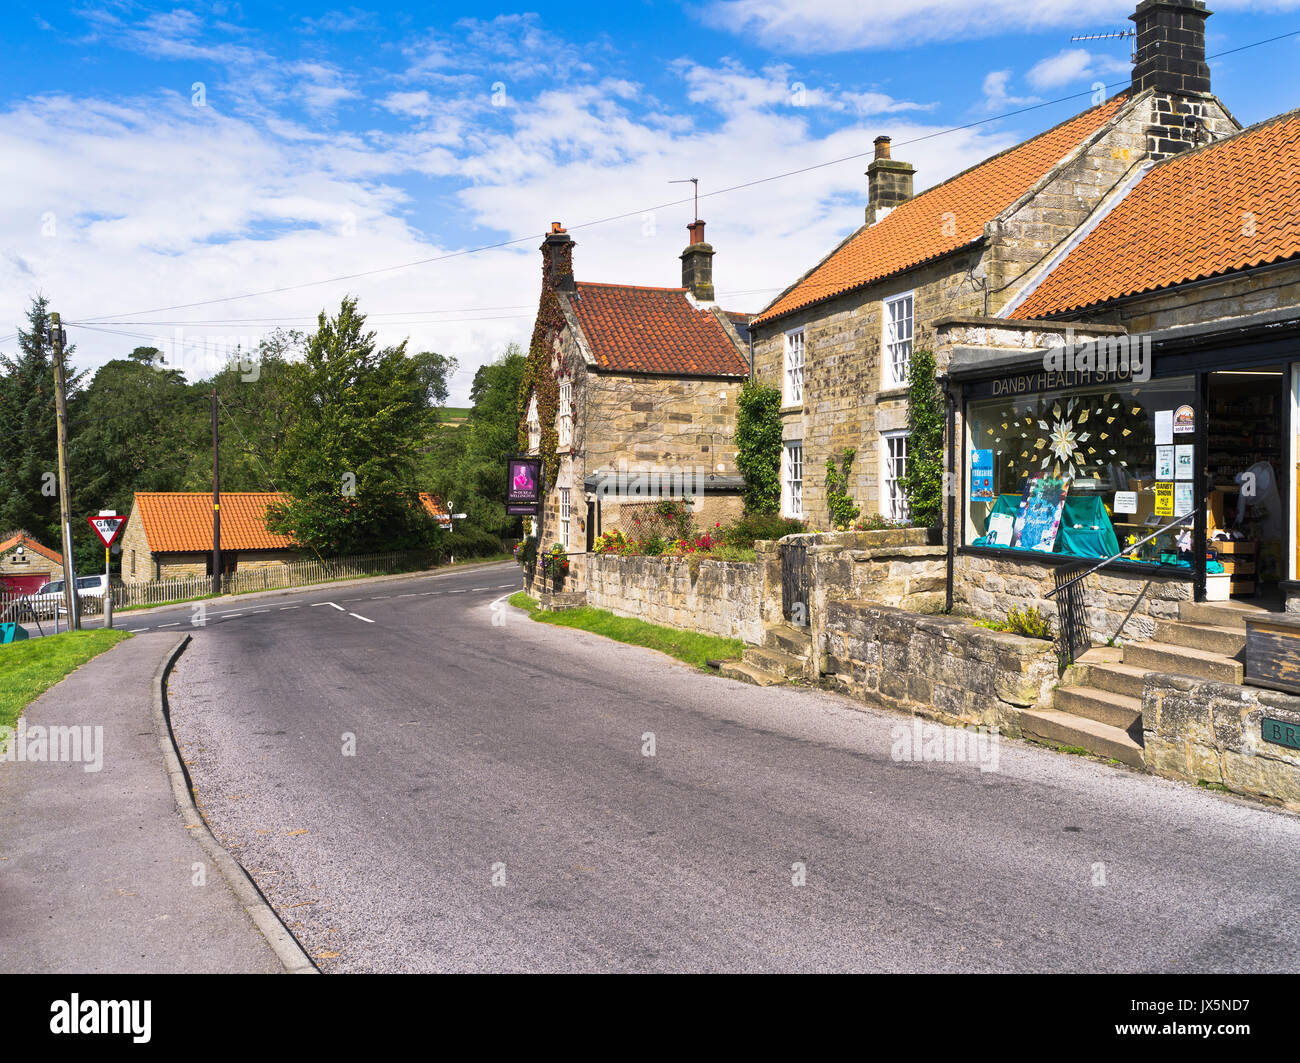 dh North Yorkshire Moors DANBY NORTH YORKSHIRE Village Hotel traditionell york Moor House Shop Dörfer yorks Stockfoto